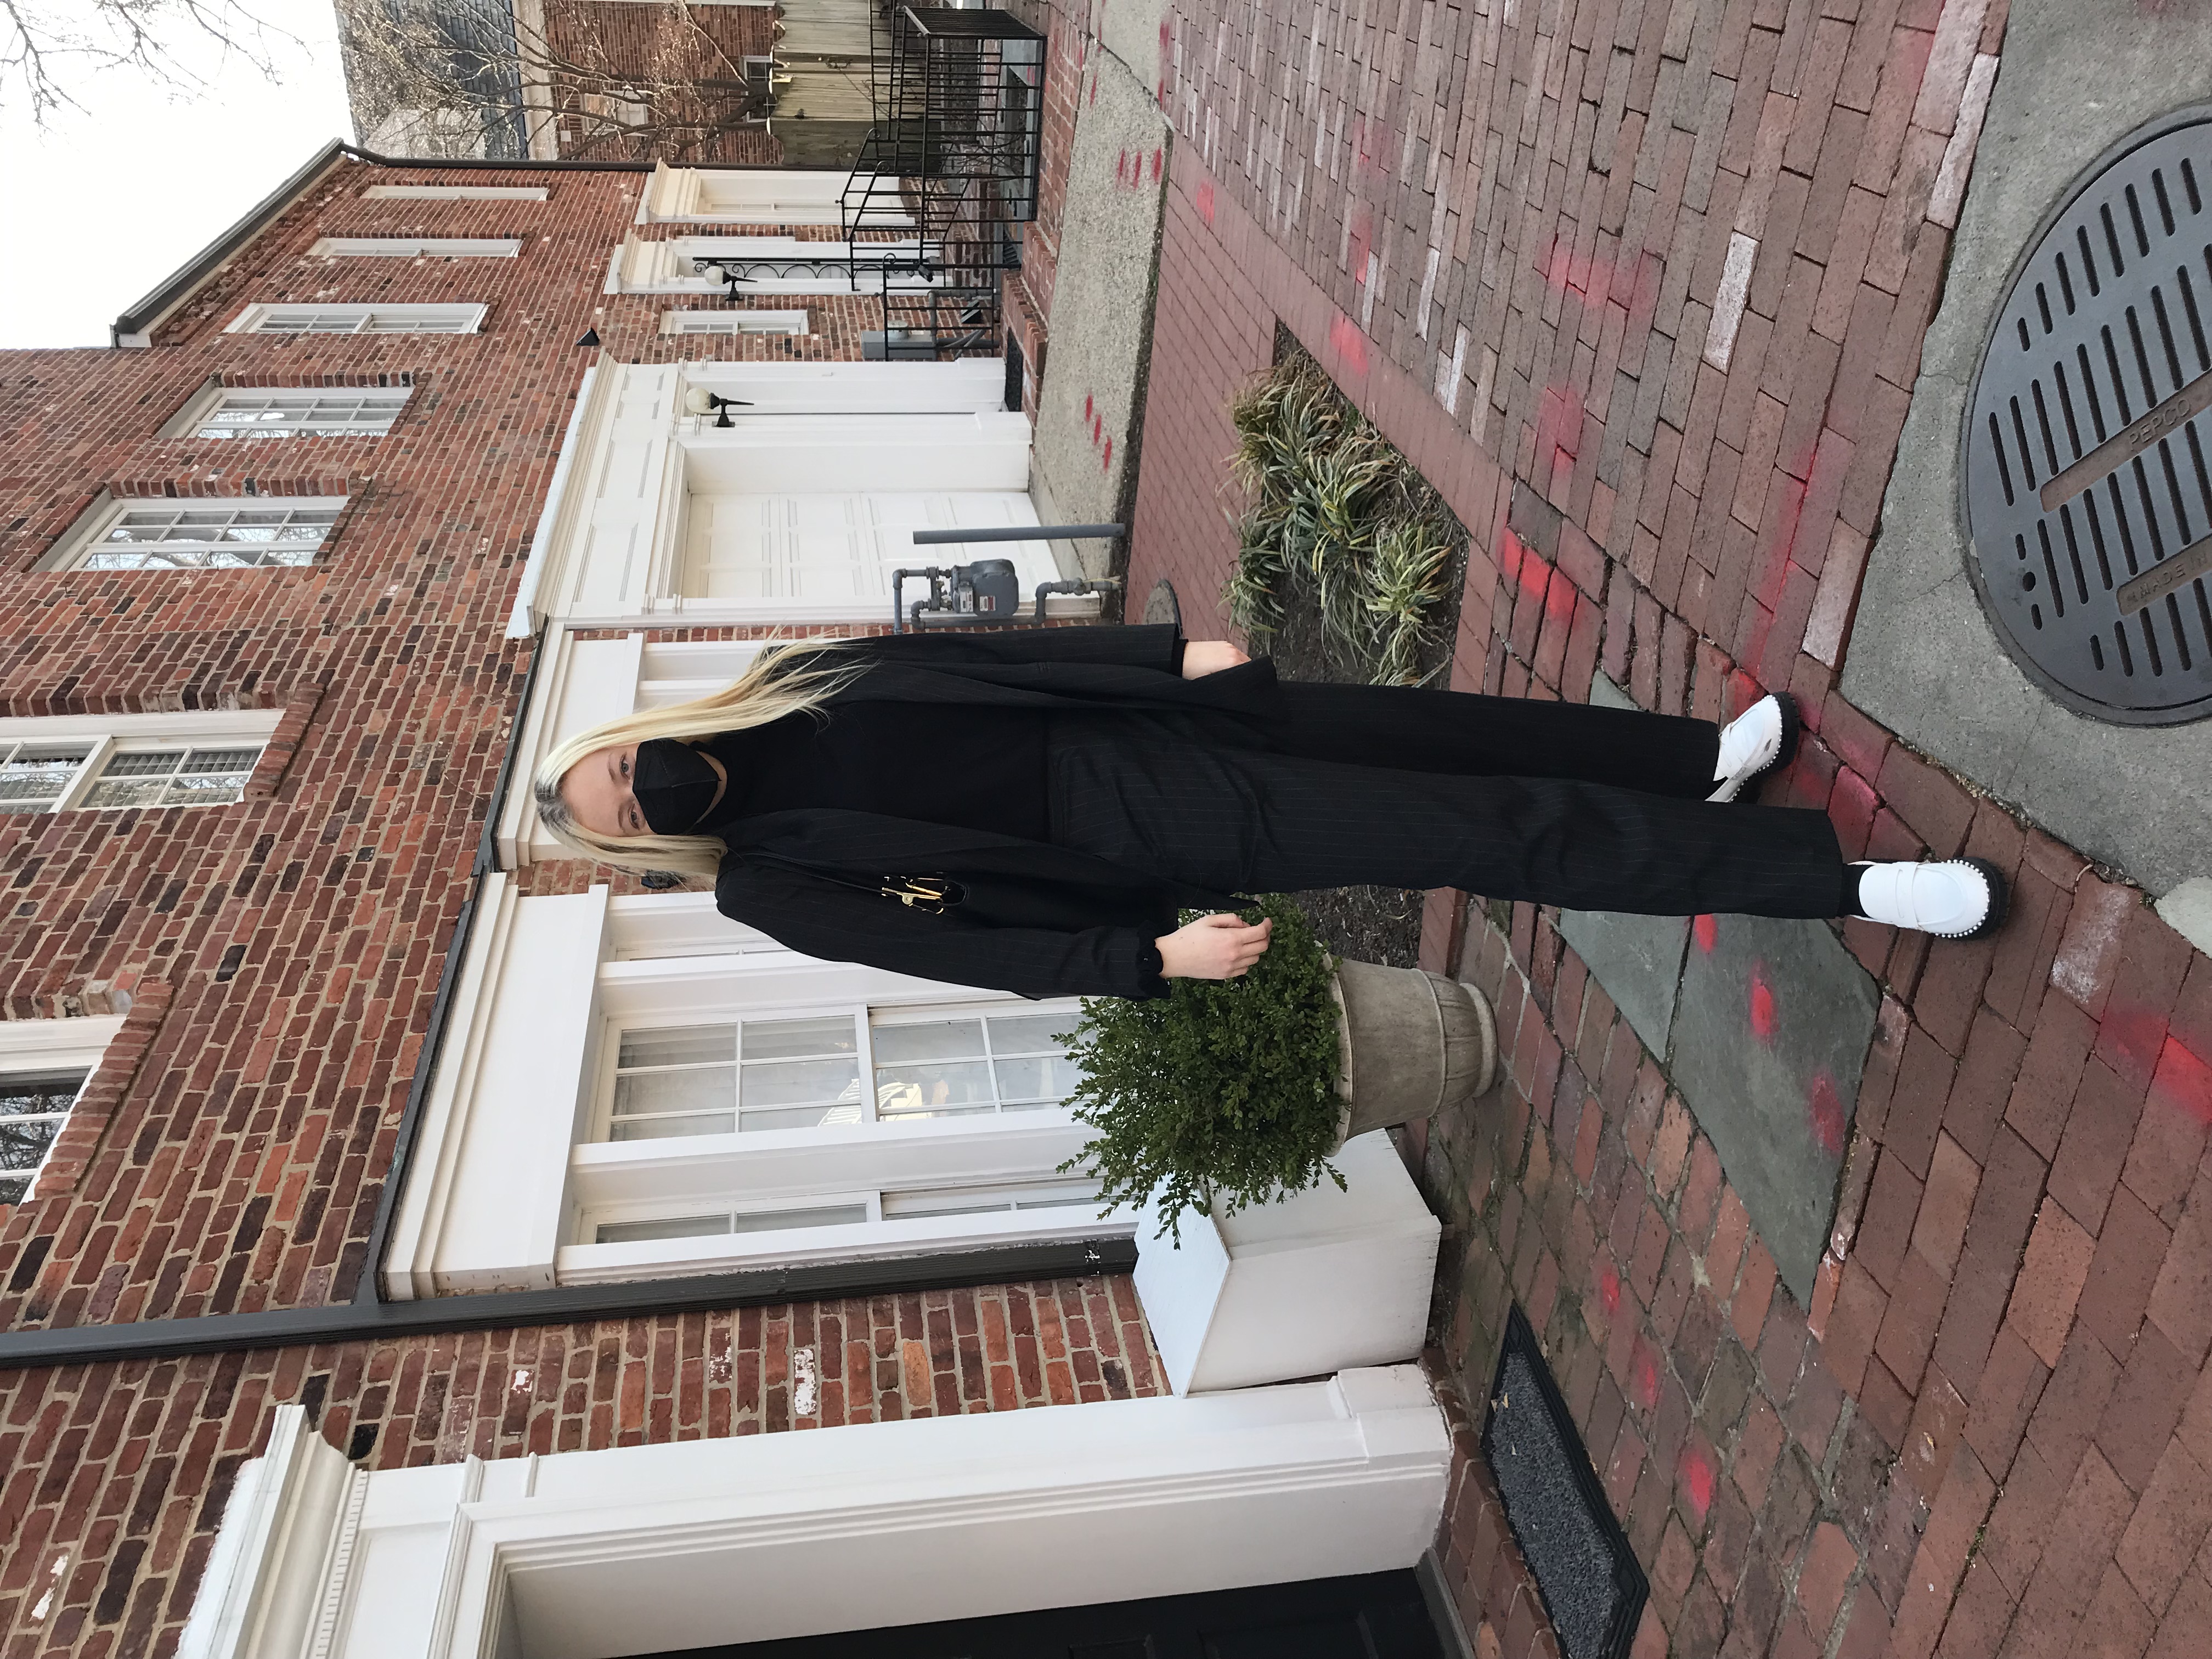 Layla Mitchell dressed all in black posing in front of some brick buildings. 